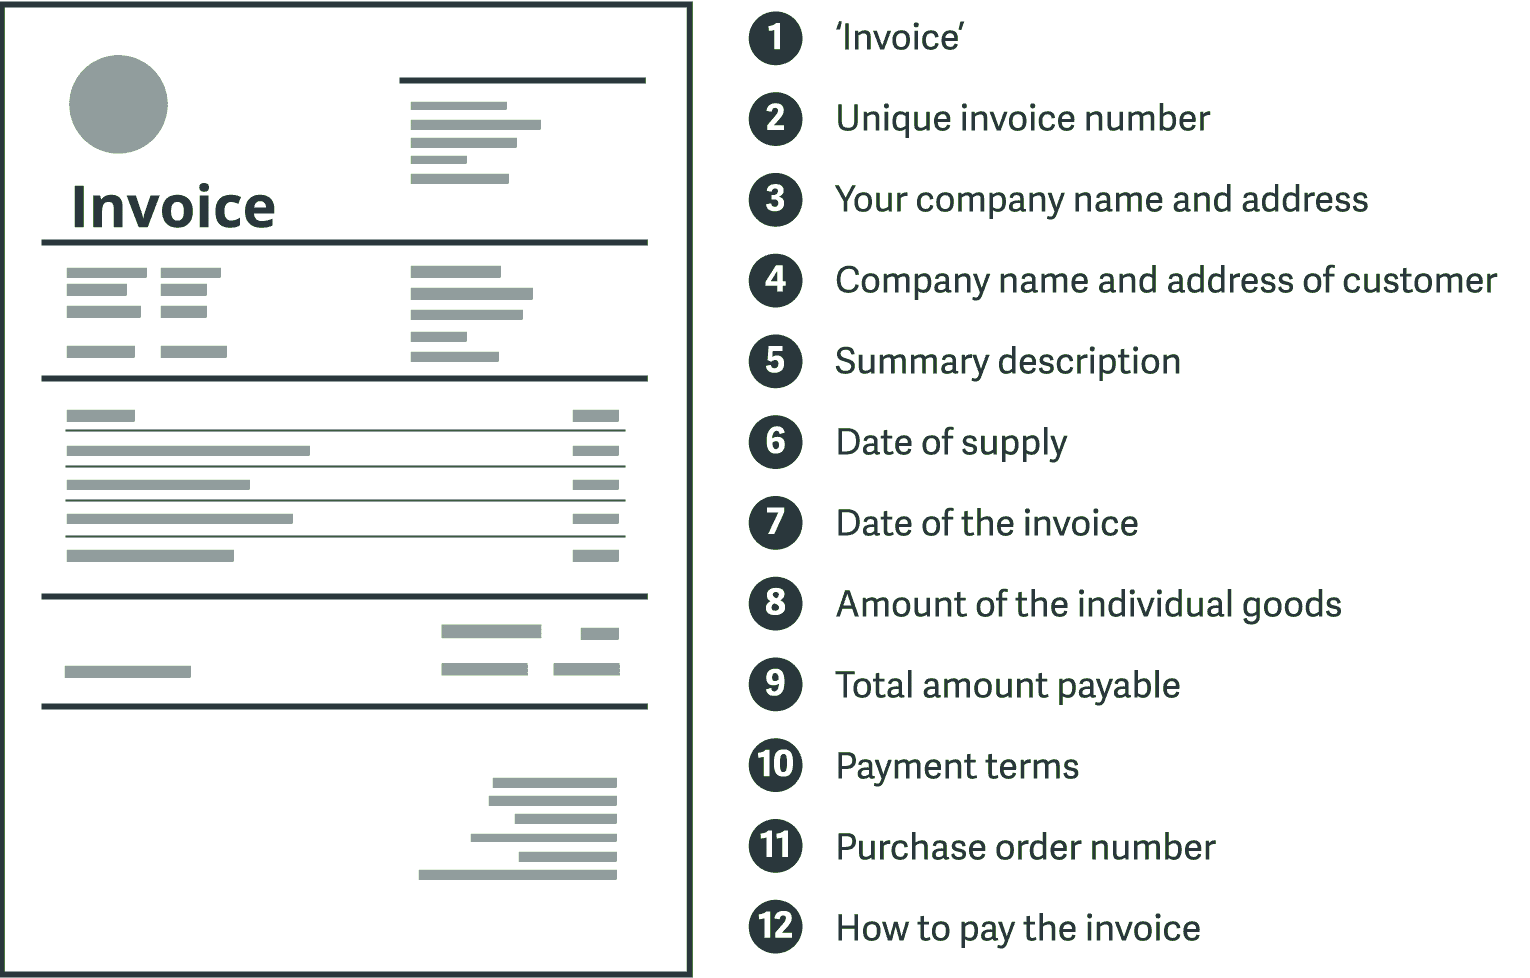 Invoice Cheat Sheet What You Need To Include On Your Invoices Sage Advice United Kingdom